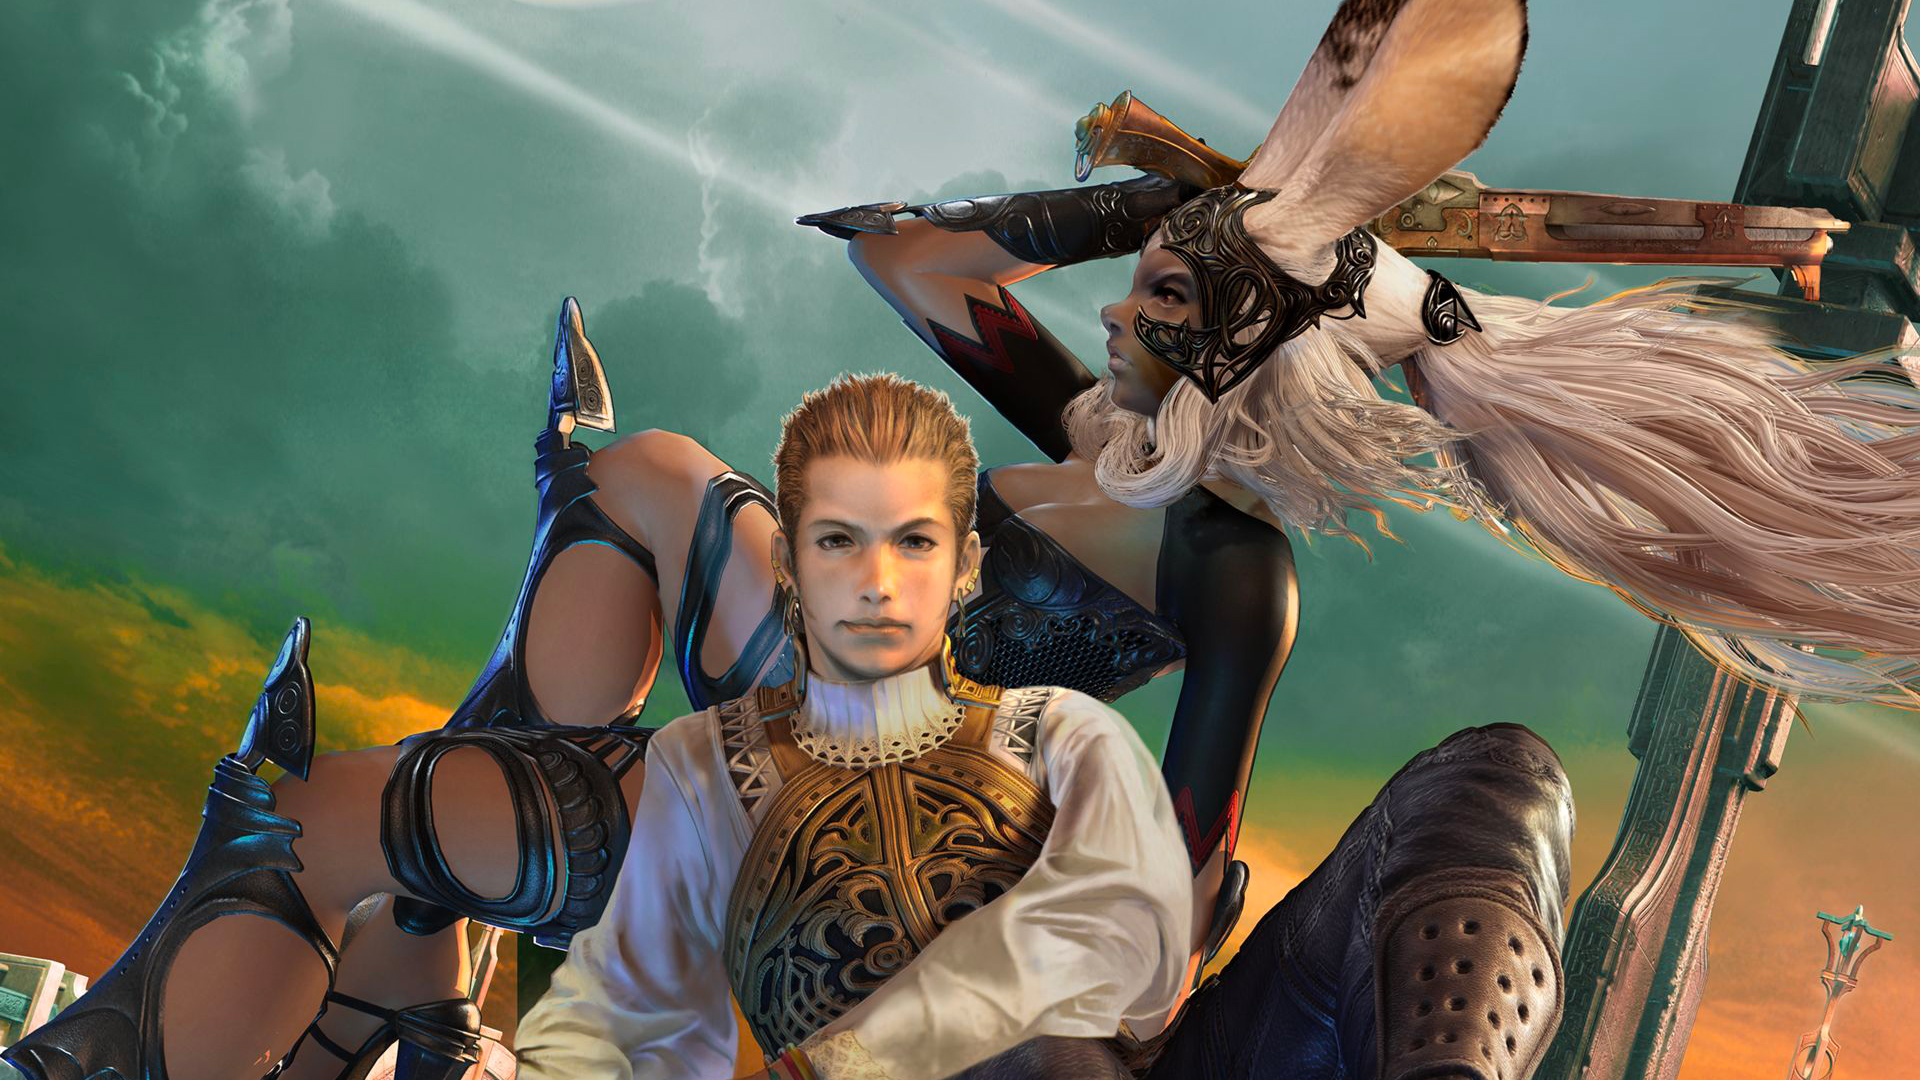 FINAL FANTASY XII - Balthier and Fran